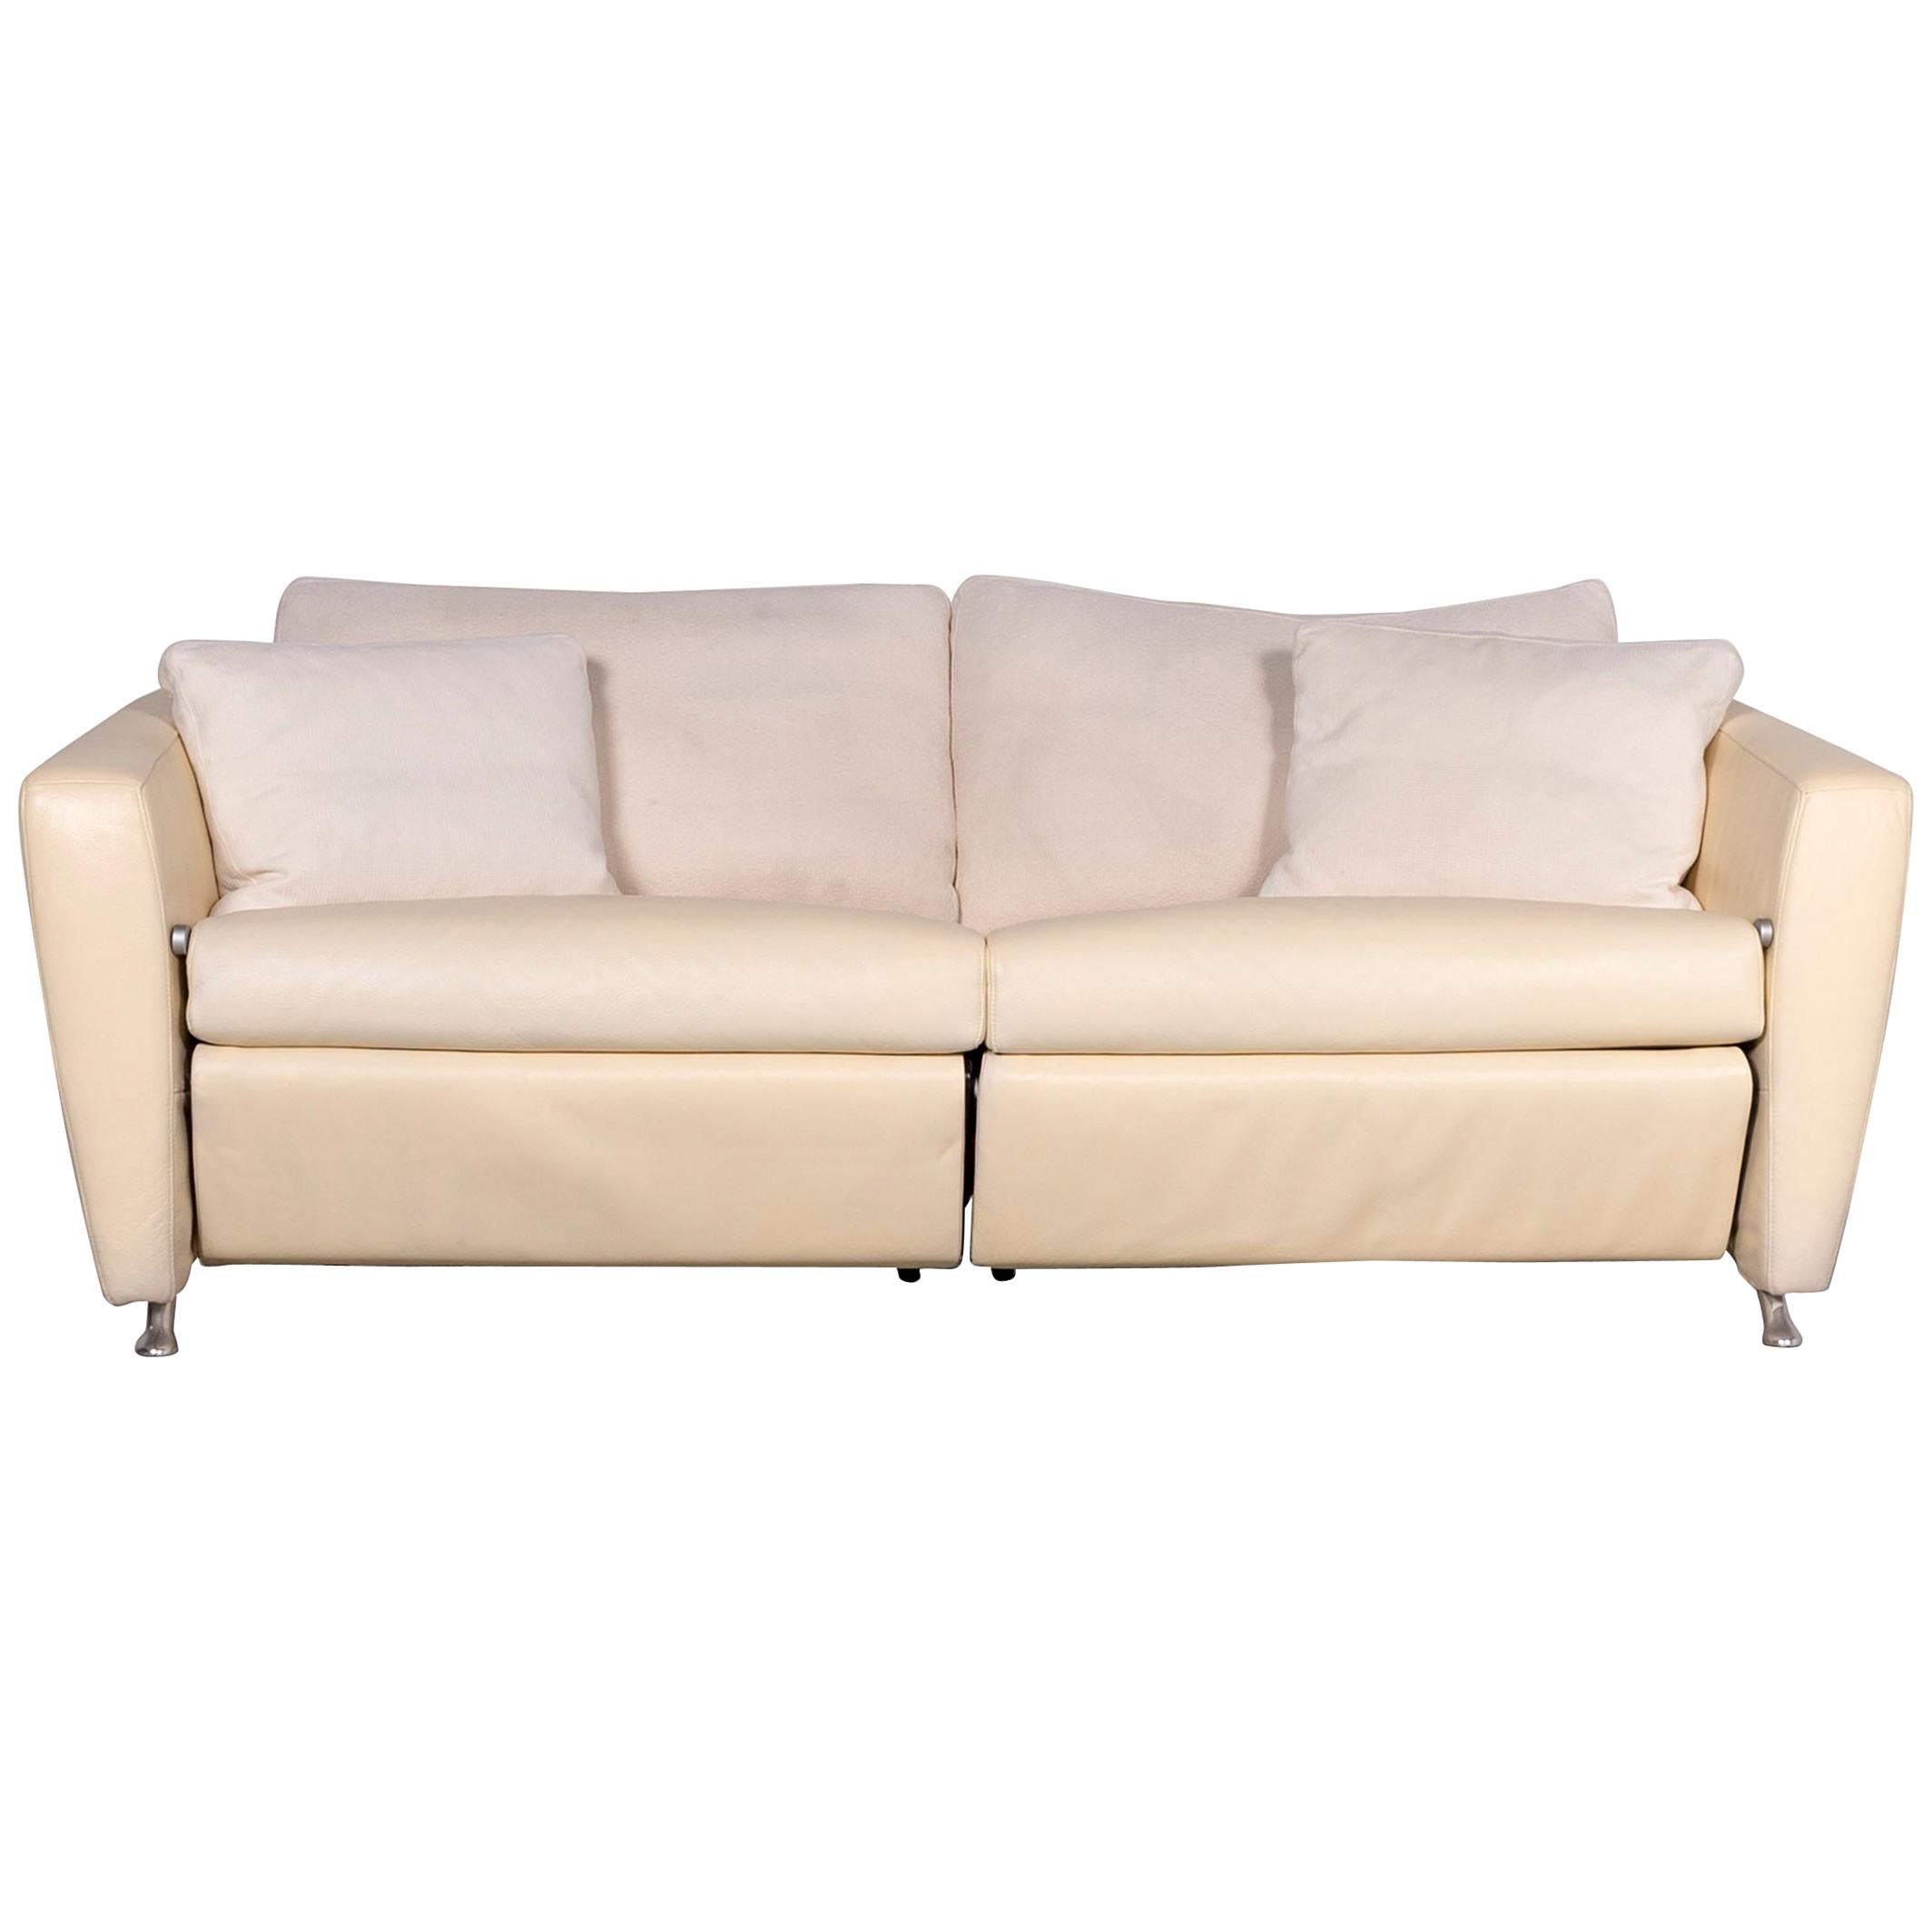 FSM Sesam Leather Sofa Off-White Two-Seat Function For Sale